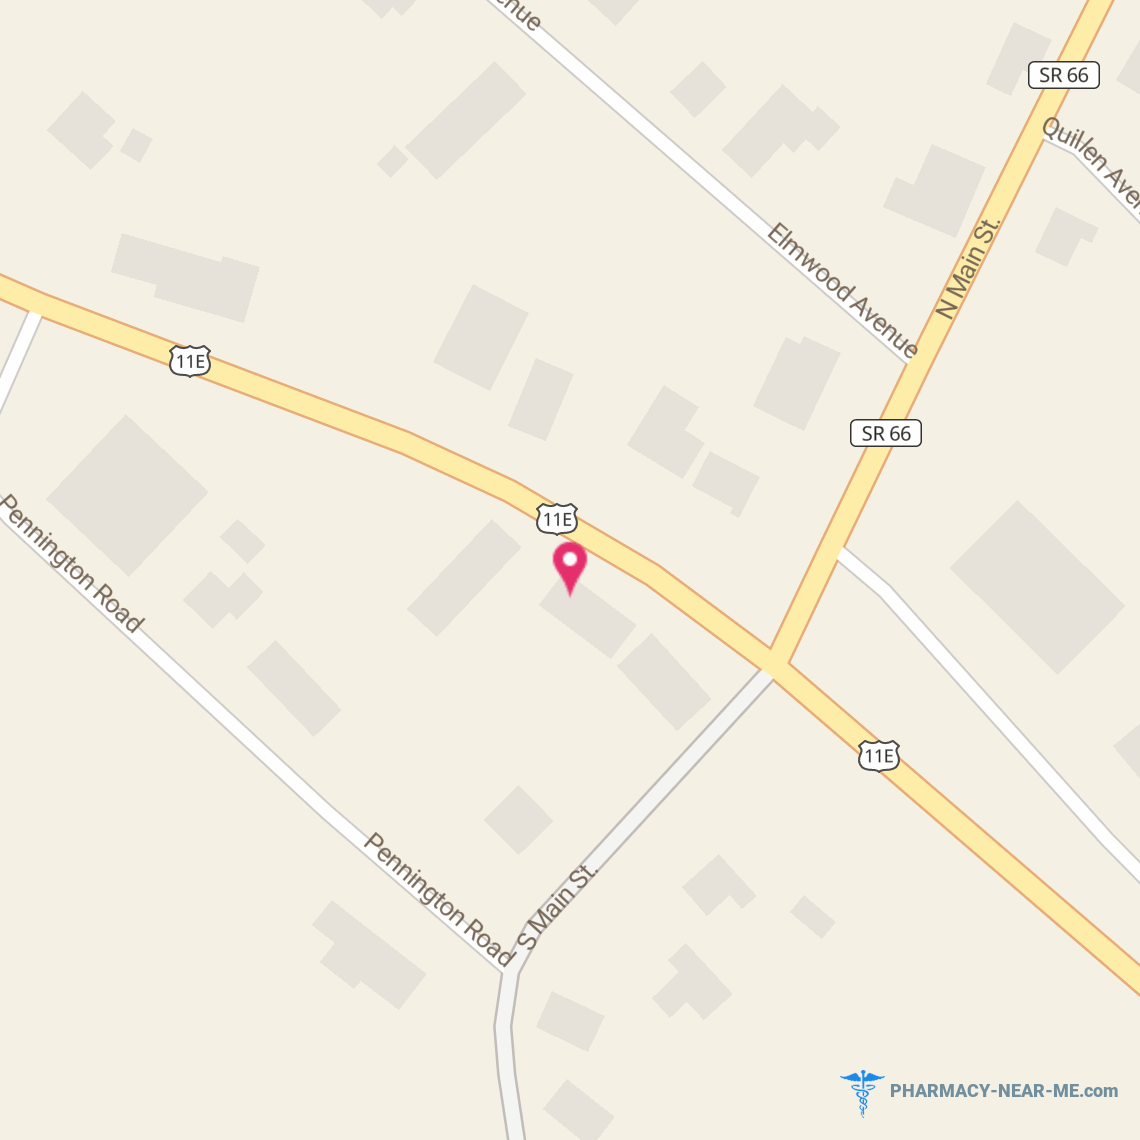 CUNNINGHAM DRUGS - Pharmacy Hours, Phone, Reviews & Information: 411 Highway 11 E, Bulls Gap, Tennessee 37711, United States